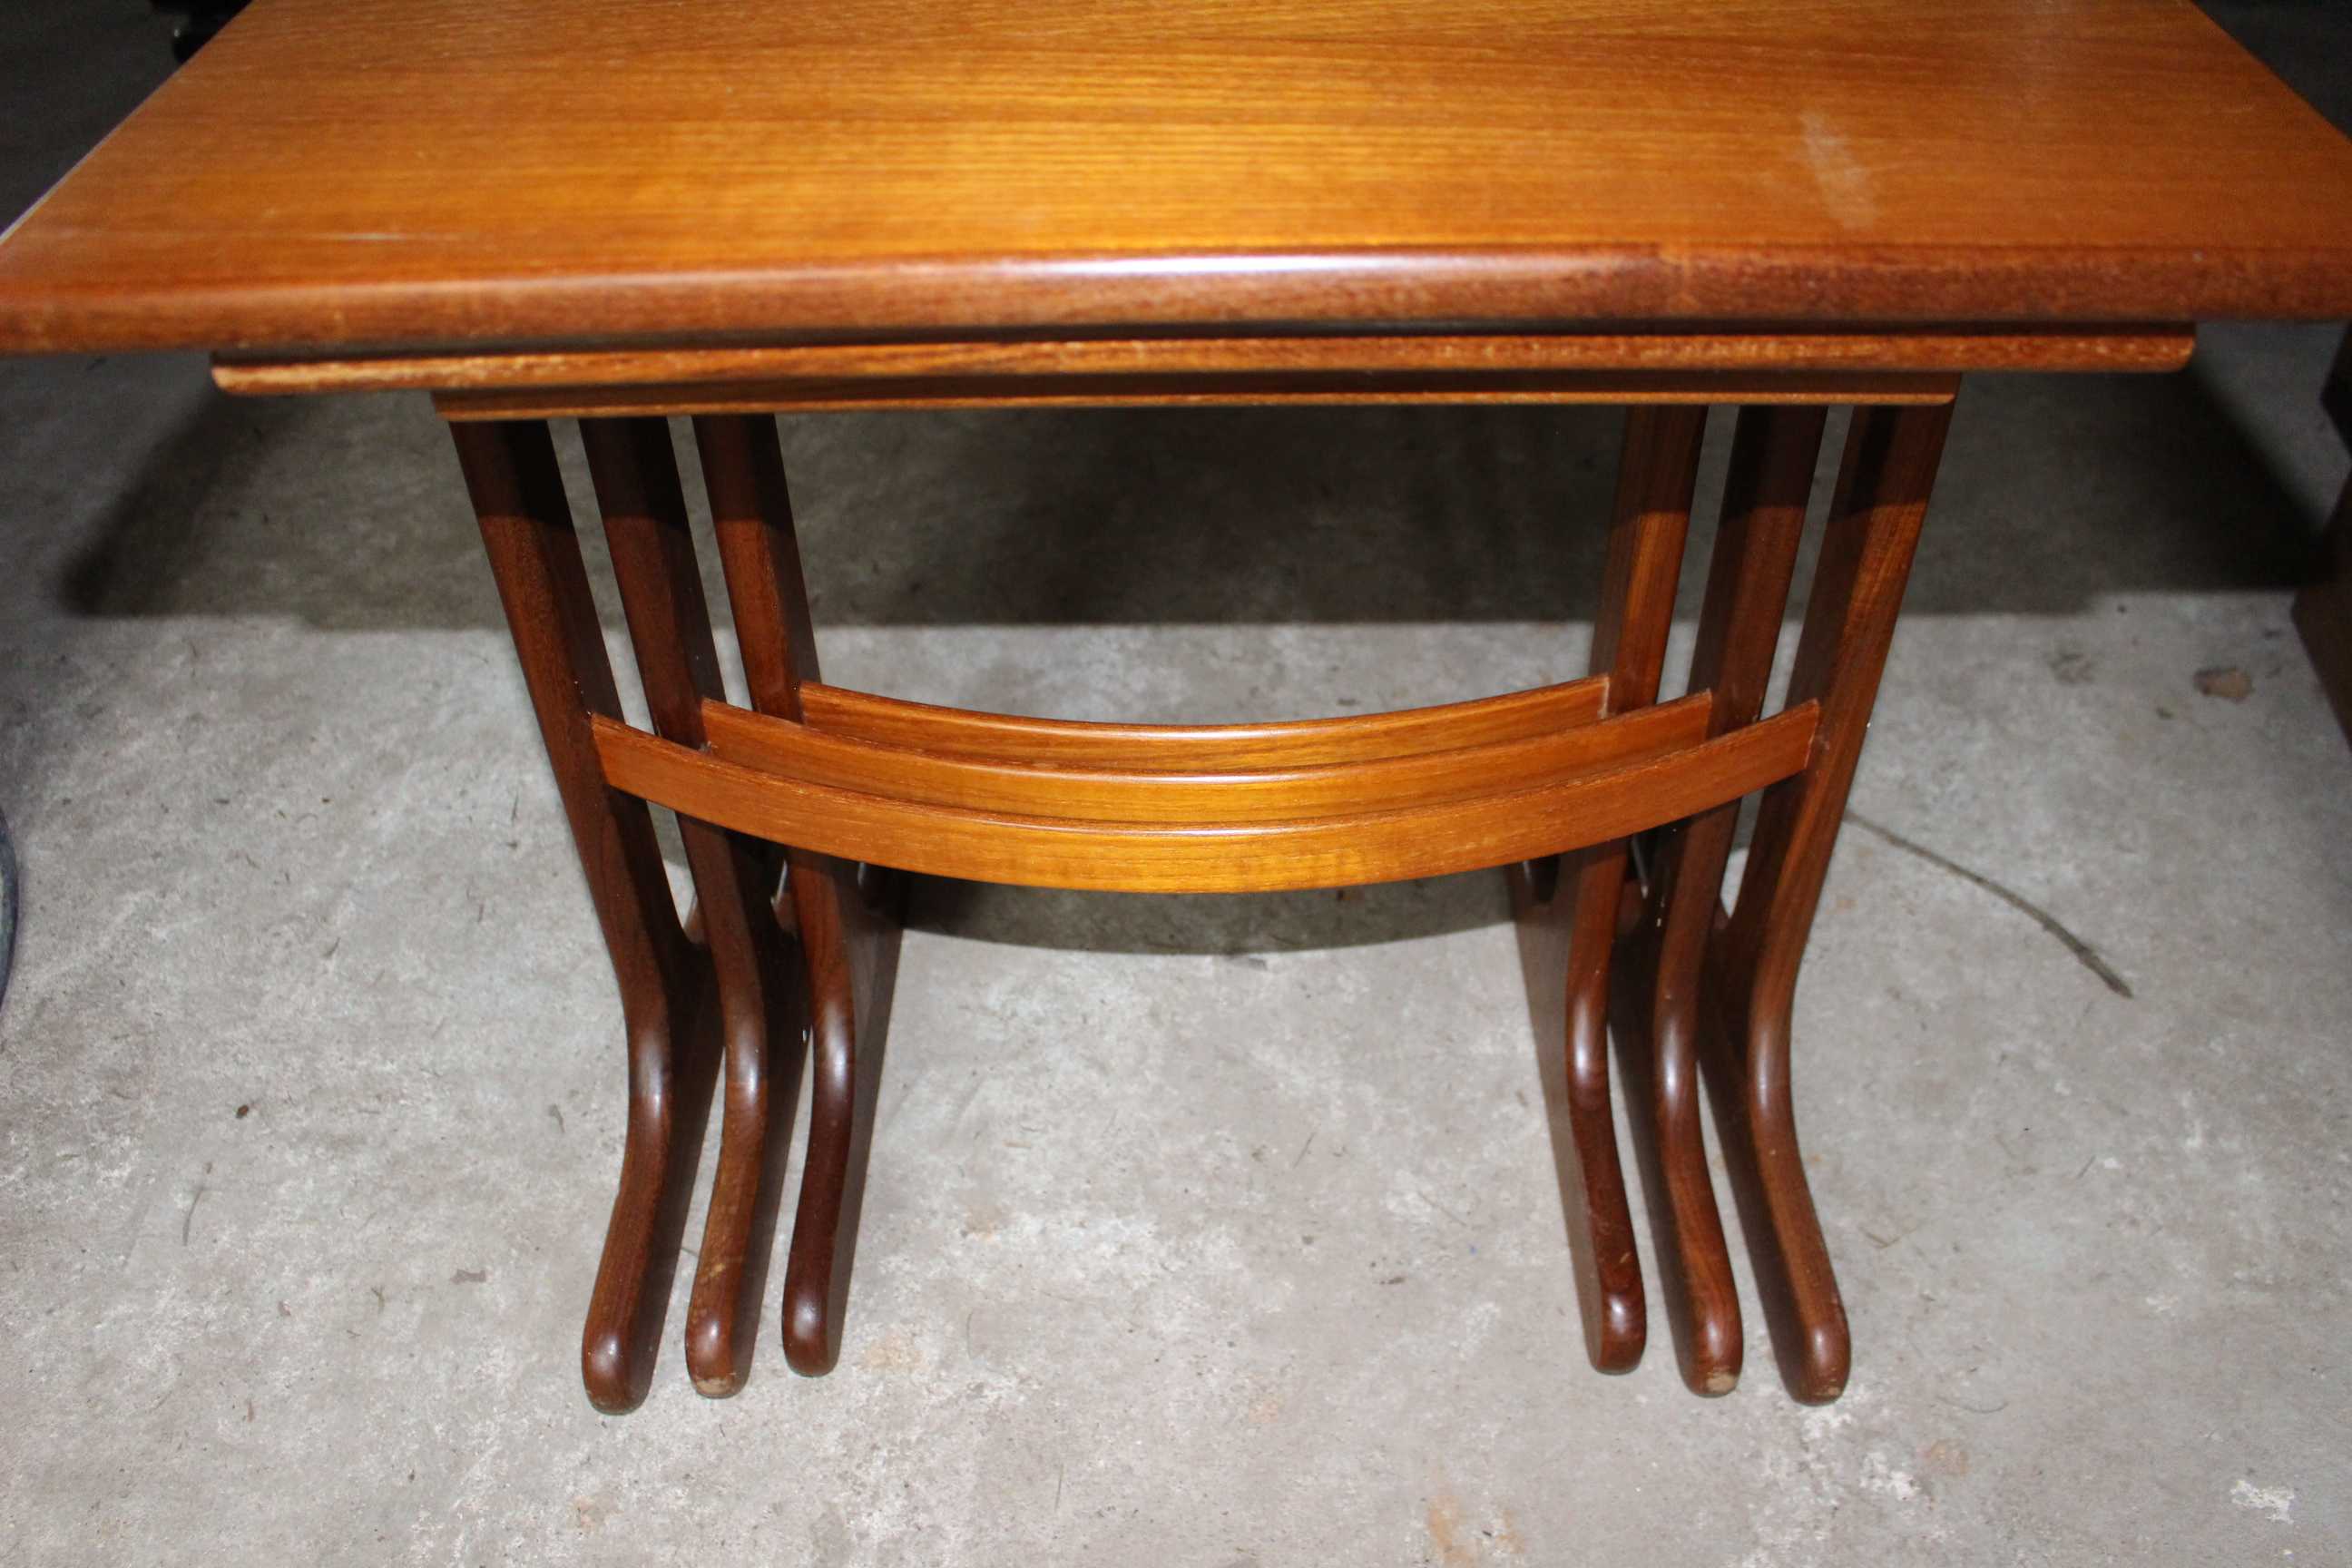 Mid Century Modern G Plan Teak Nesting Tables, middle table does have some water/wear staining. - Image 2 of 3